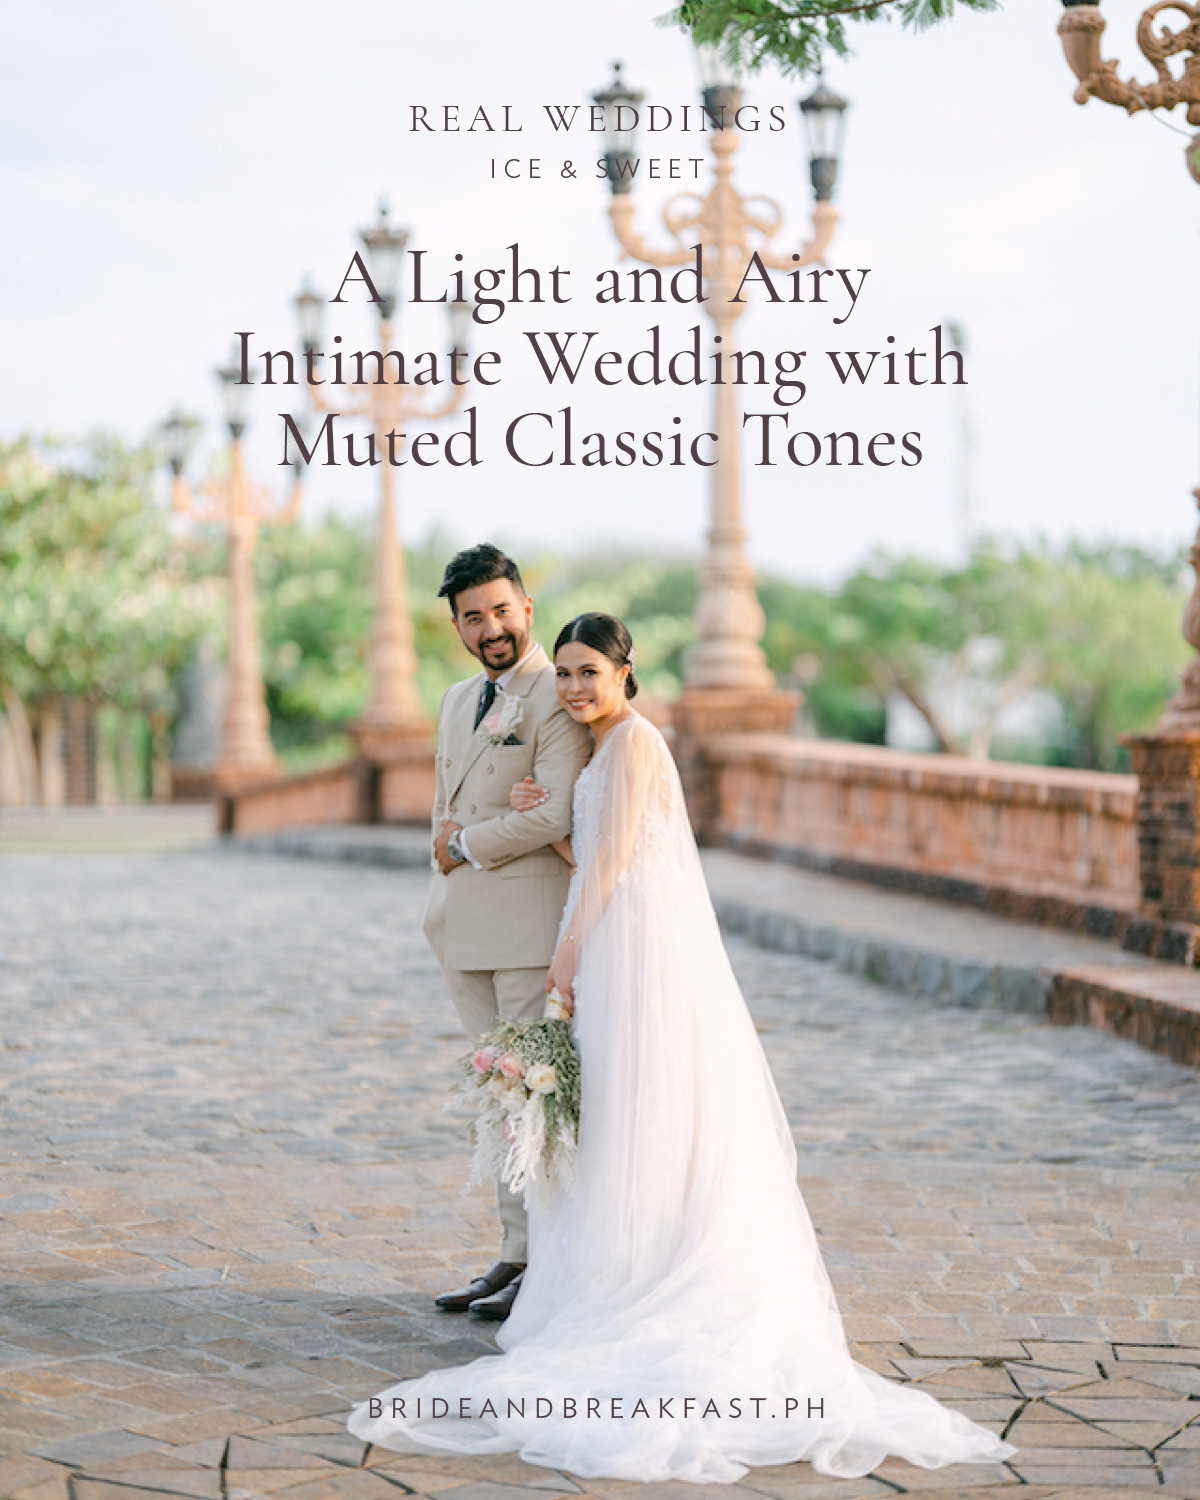 A Light and Airy Intimate Wedding with Muted Classic Tones